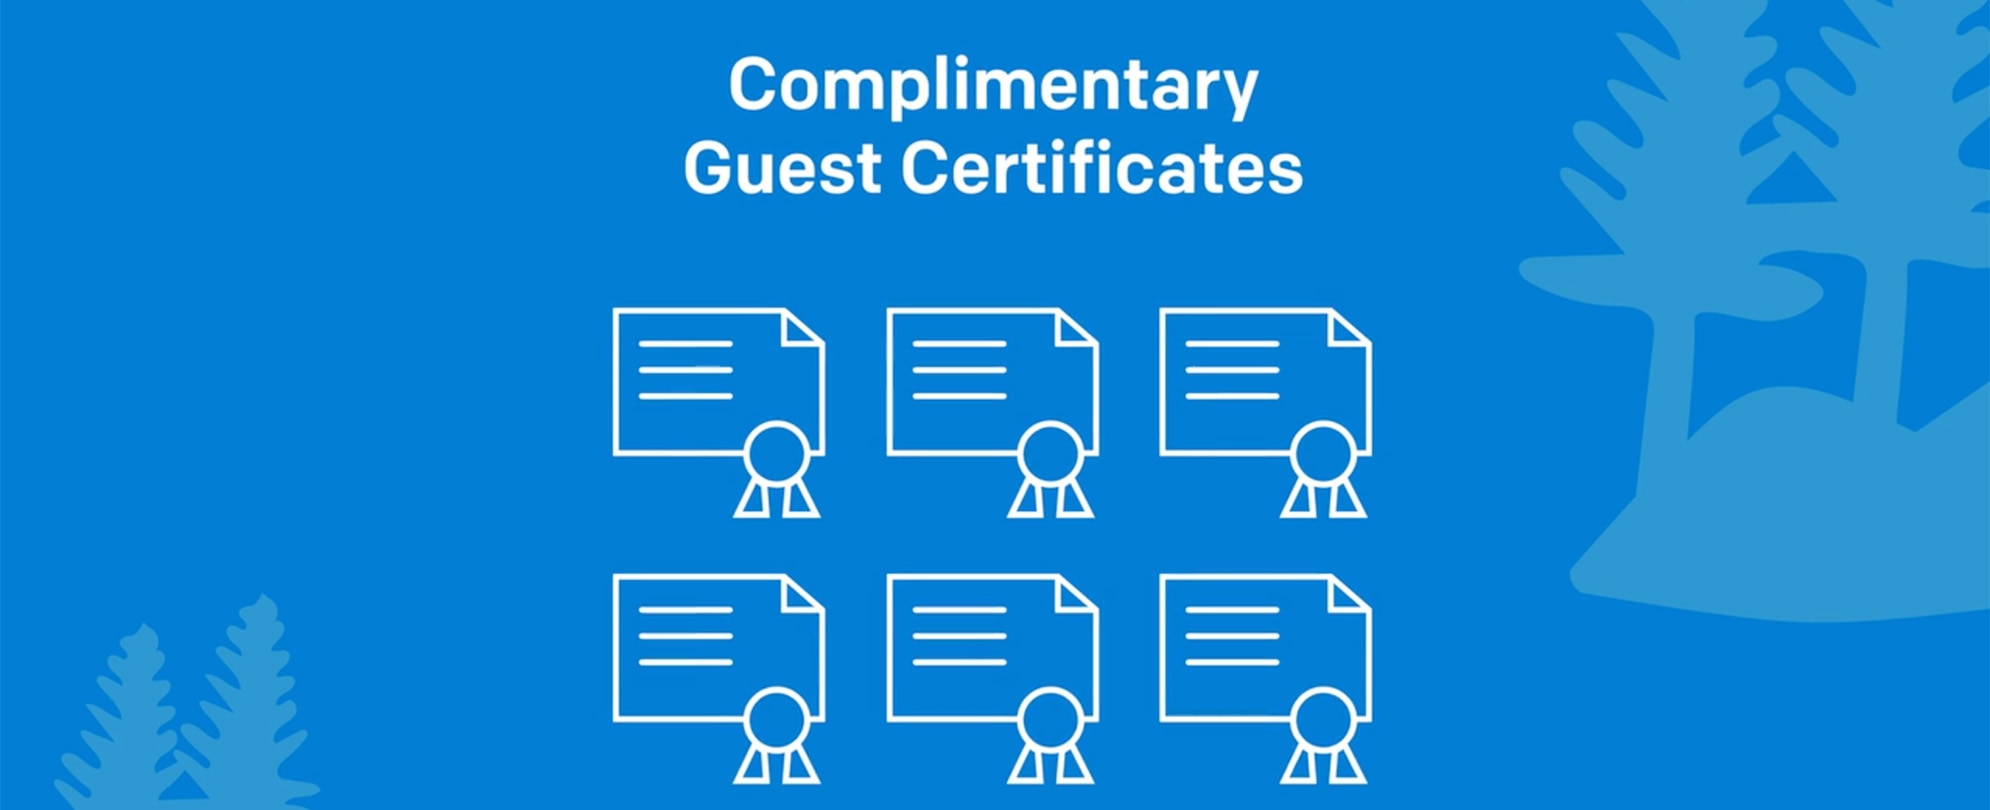 Complimentary Guest Certificates with illustrations of 6 certificates.